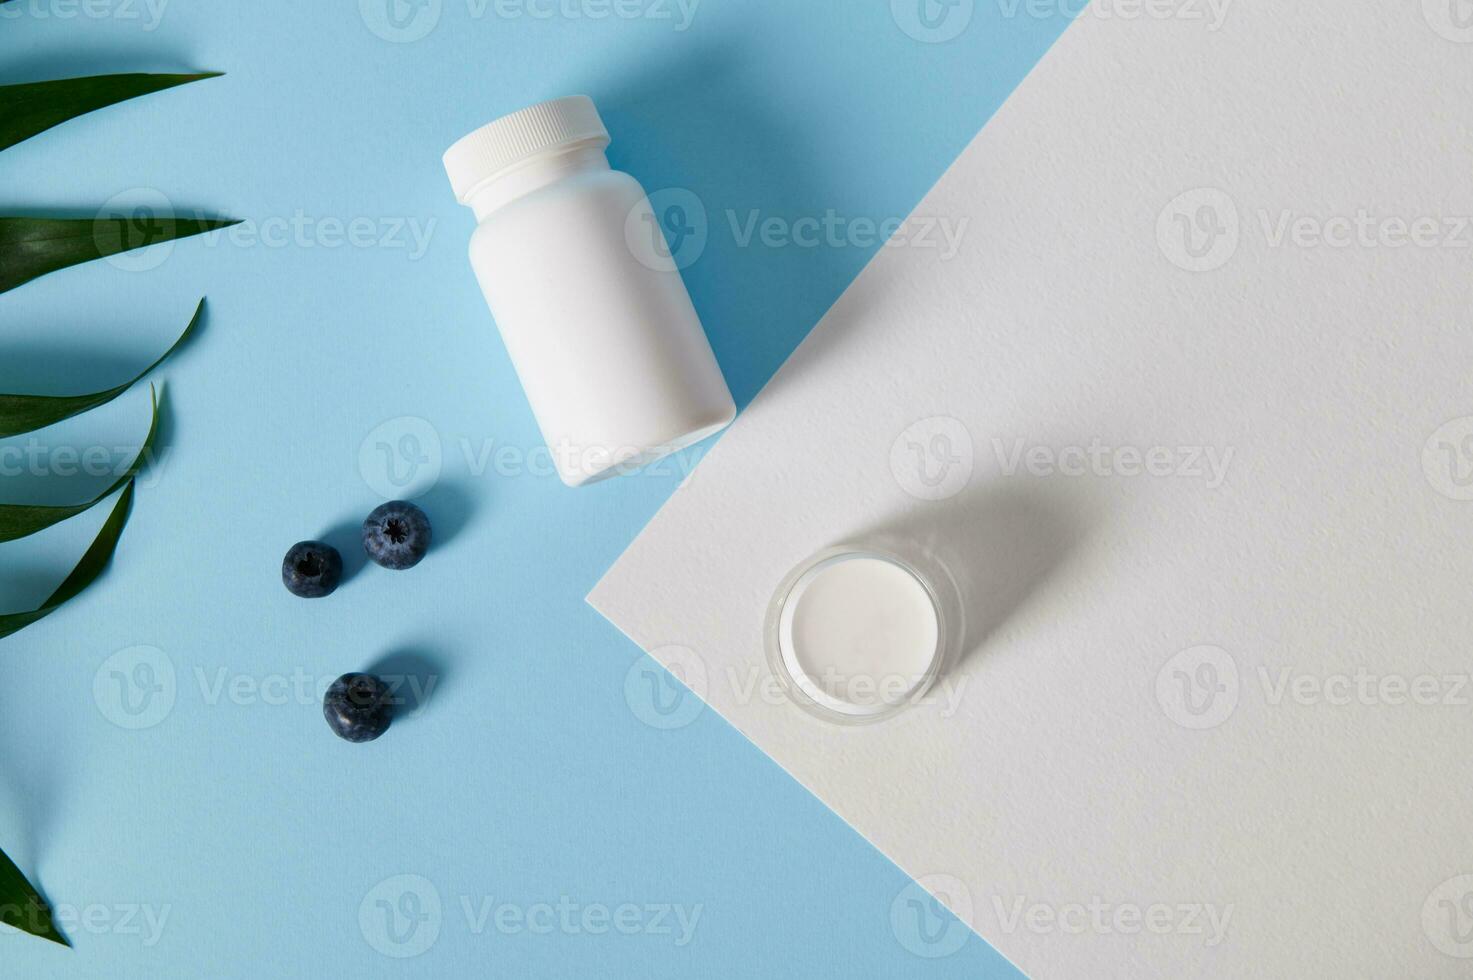 Flat lay of a pill container, bottle and scattered blueberries near a palm leaves on bicolor blue and white background photo